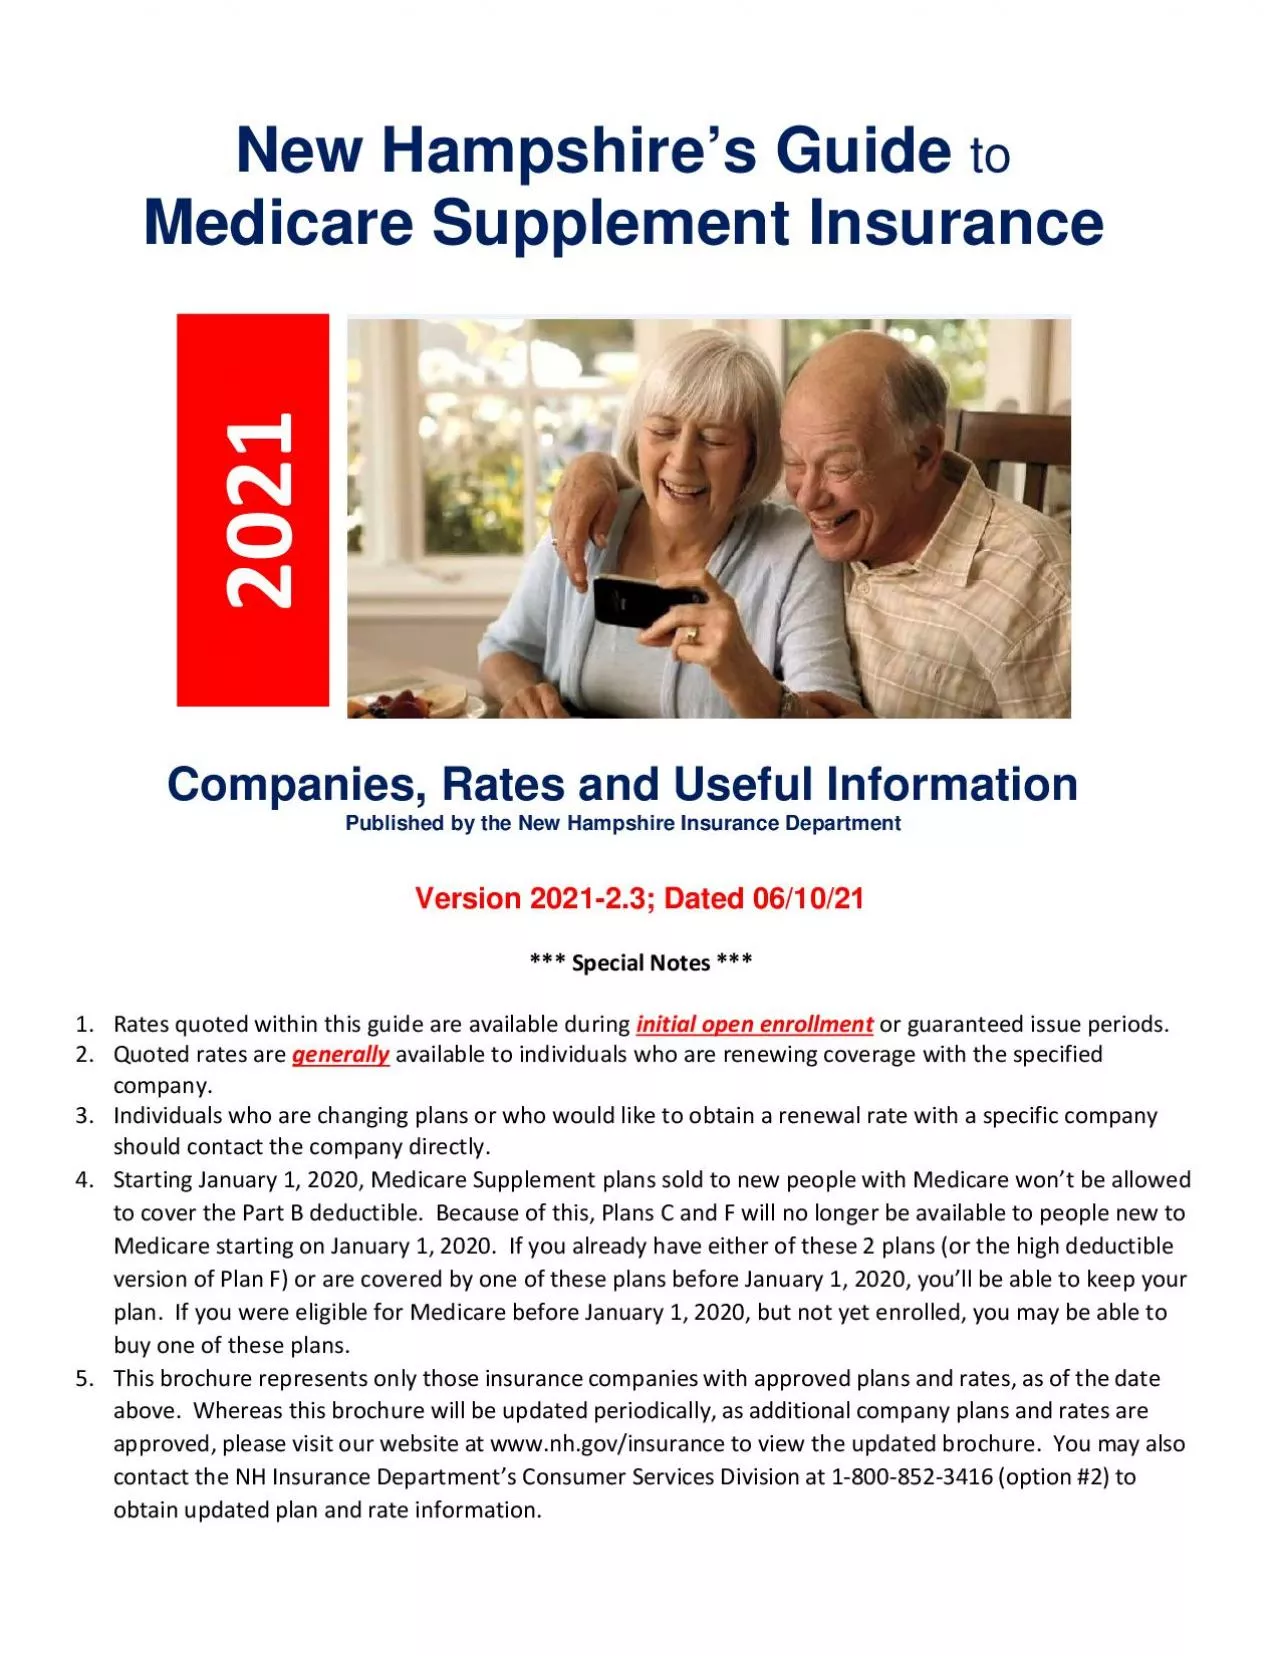 ew Hampshire146s Guide Medicare Supplement Insurance